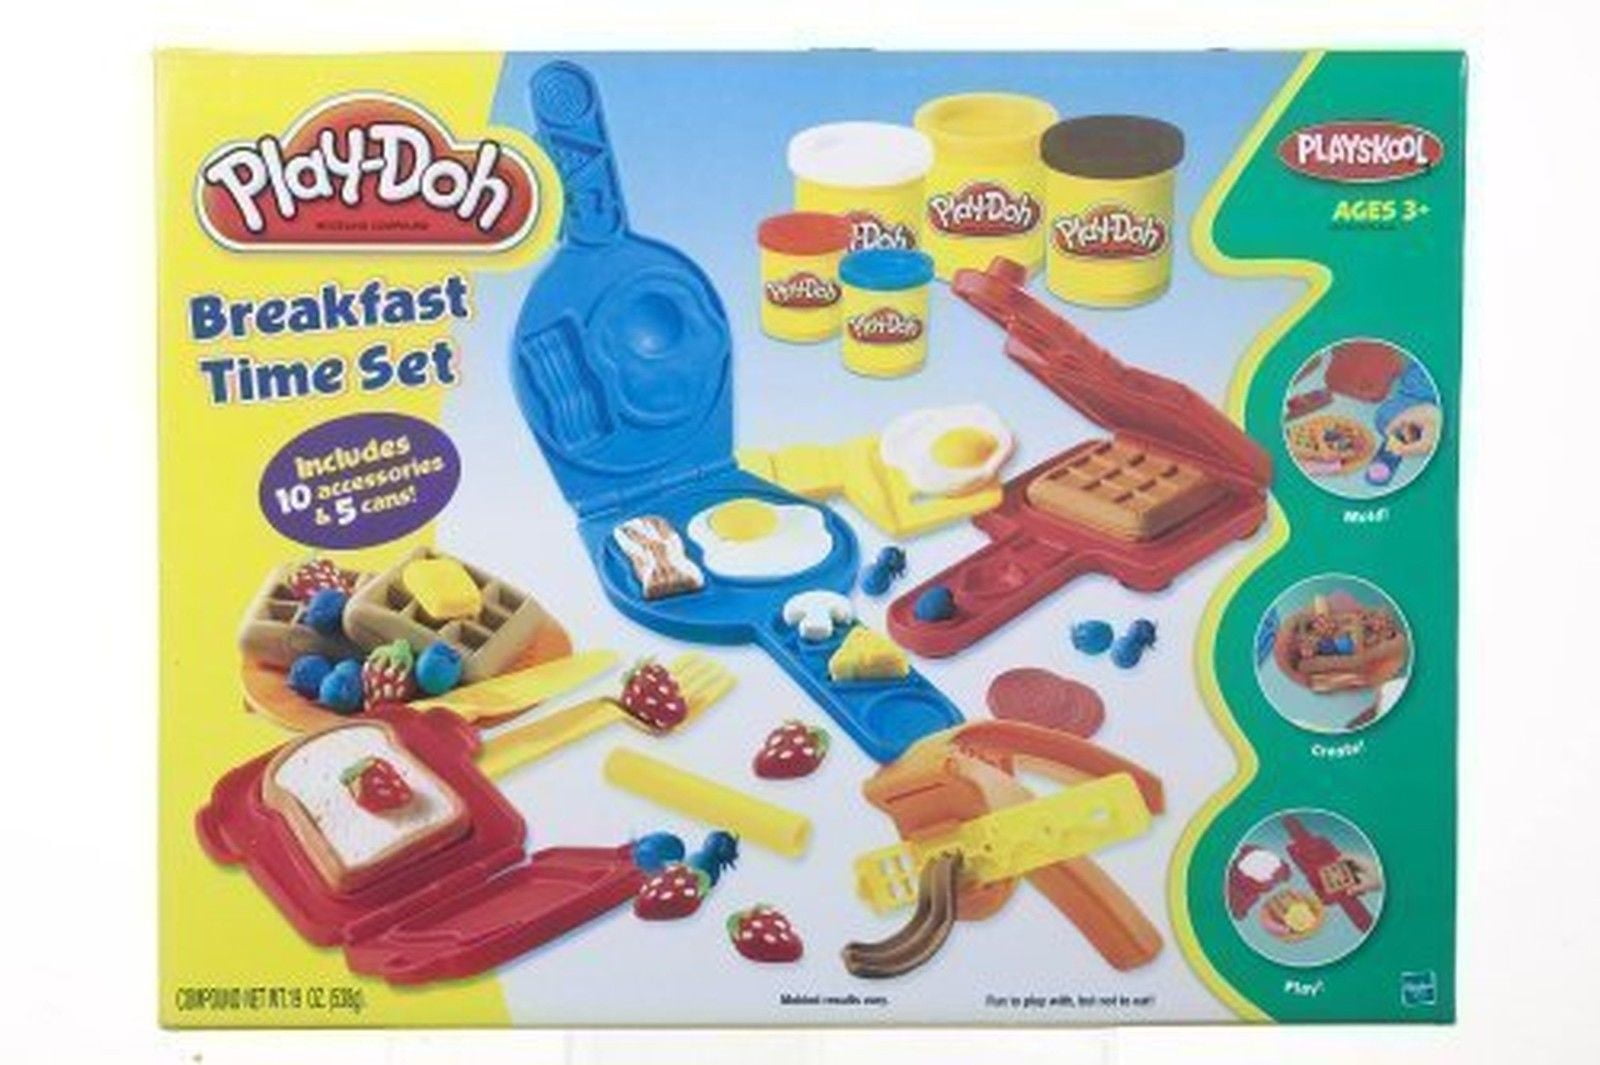 Play-Doh Breakfast Time Set Make Mold And Serve Up A Fun Play-Doh Breakfast!